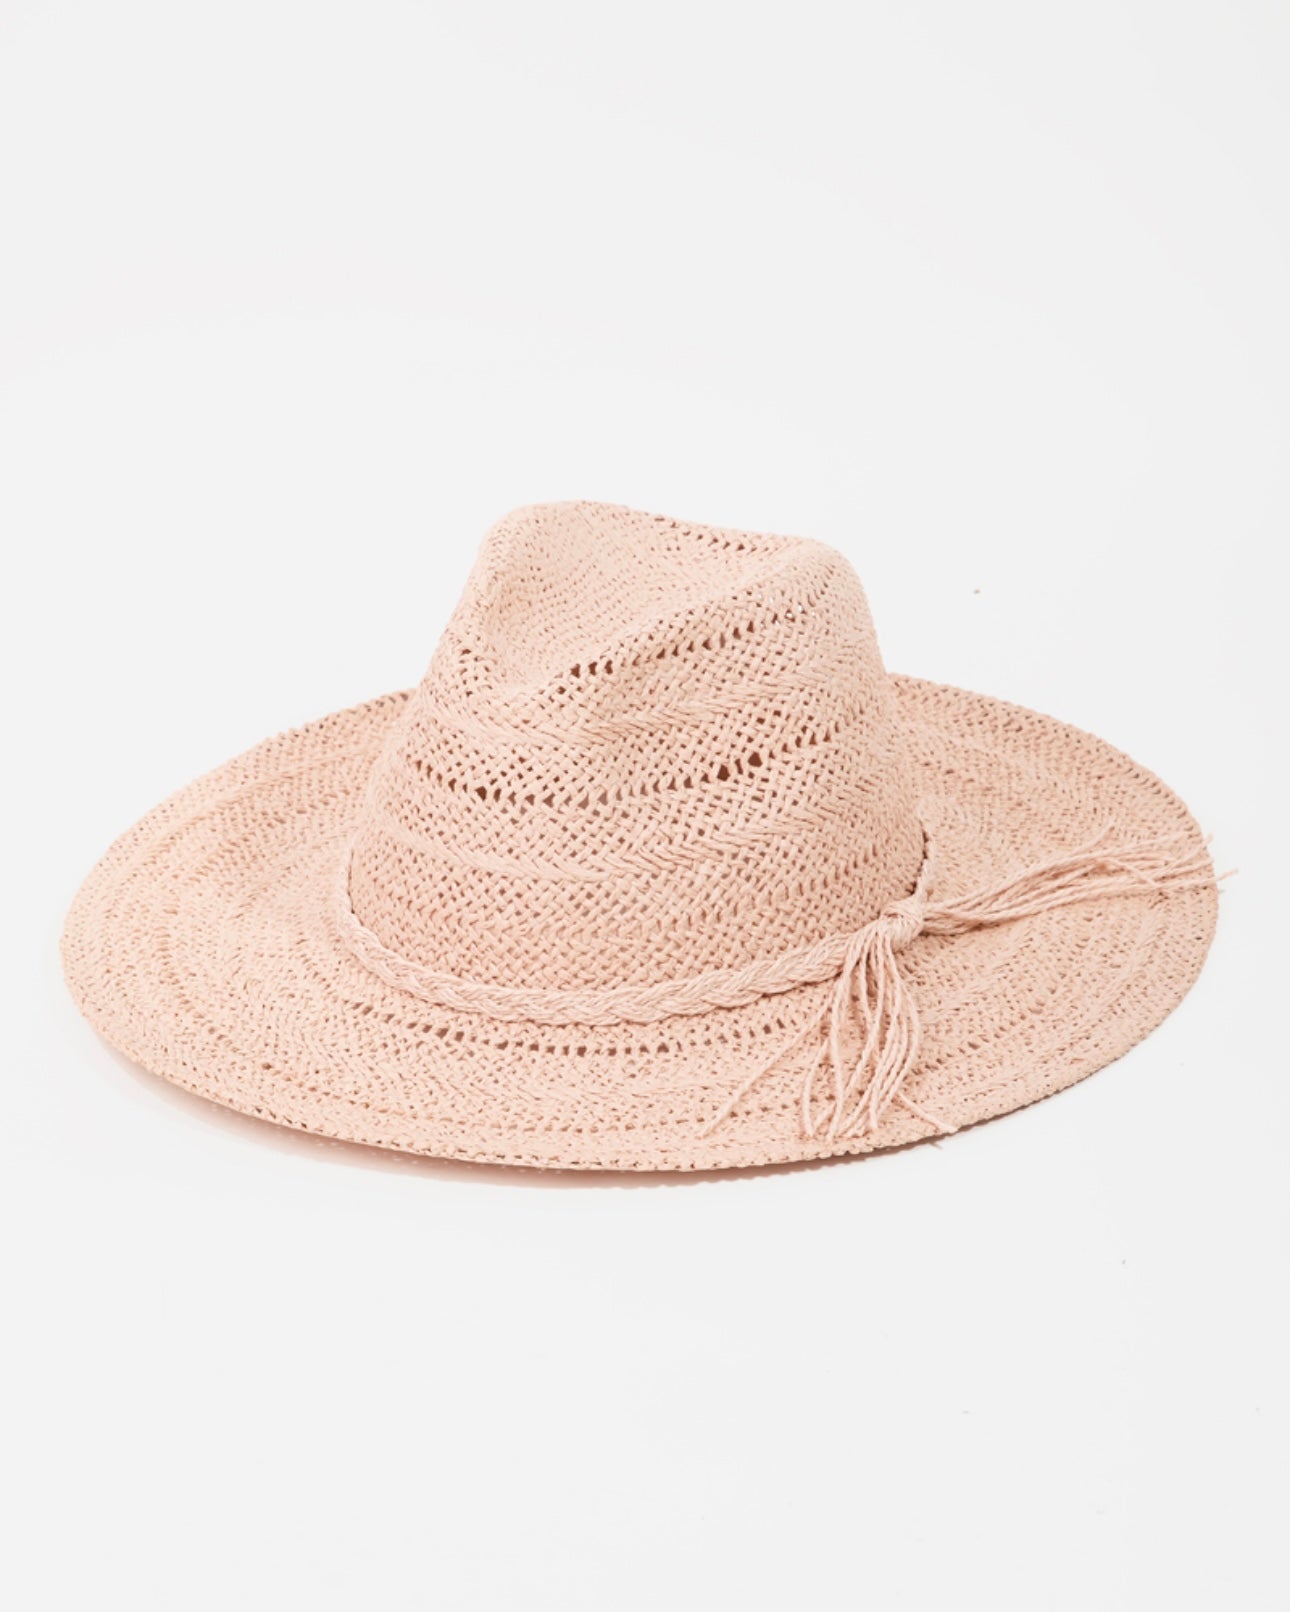 Cancun Braided Rope Straw Hat- Pink